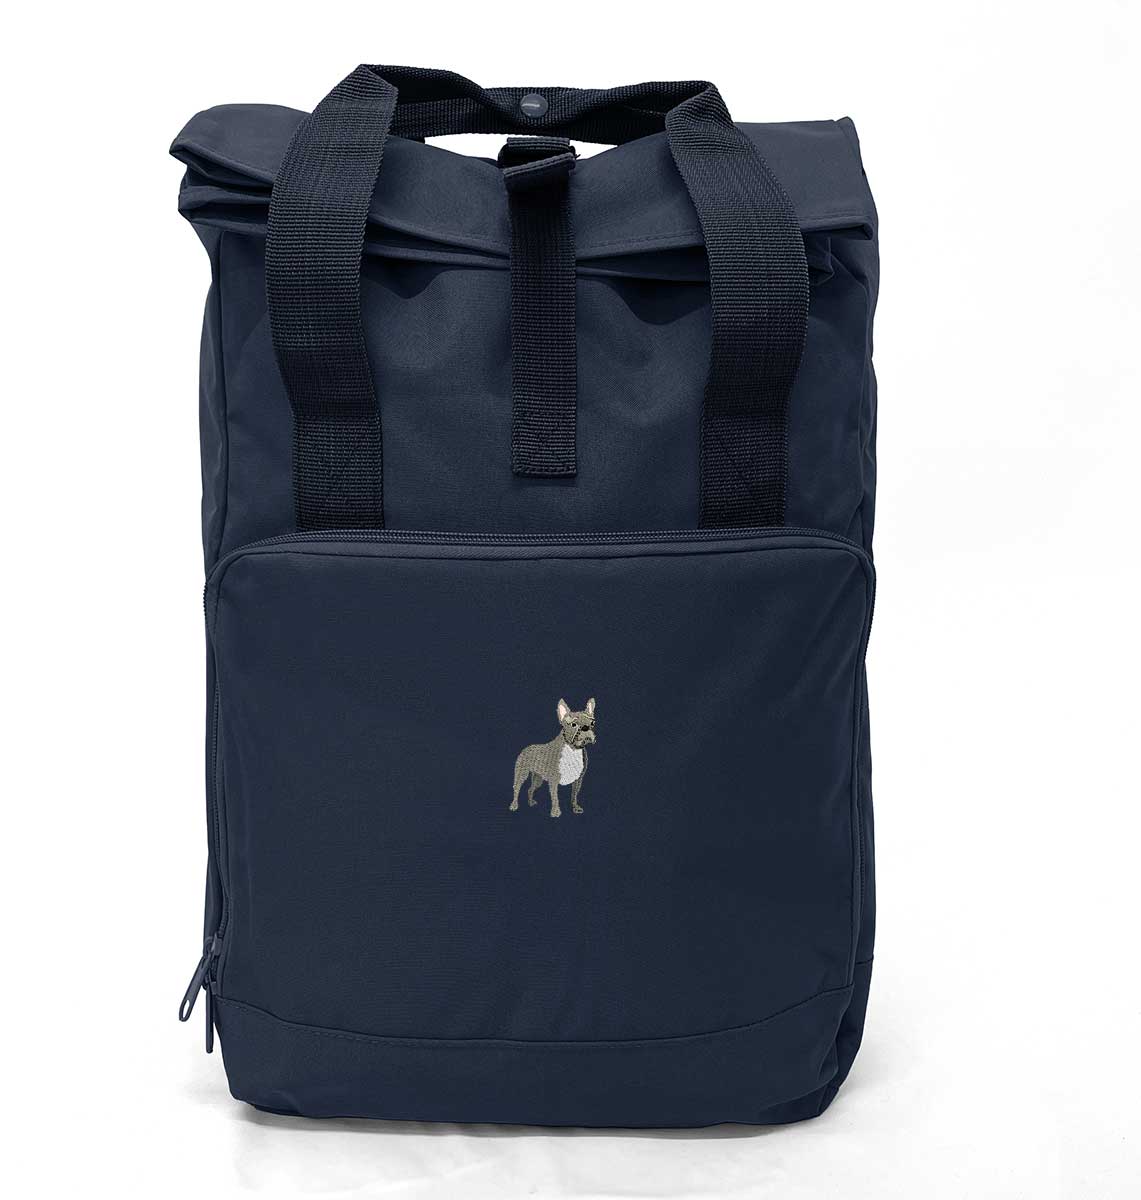 French Bulldog Roll-top Laptop Recycled Backpack - Blue Panda